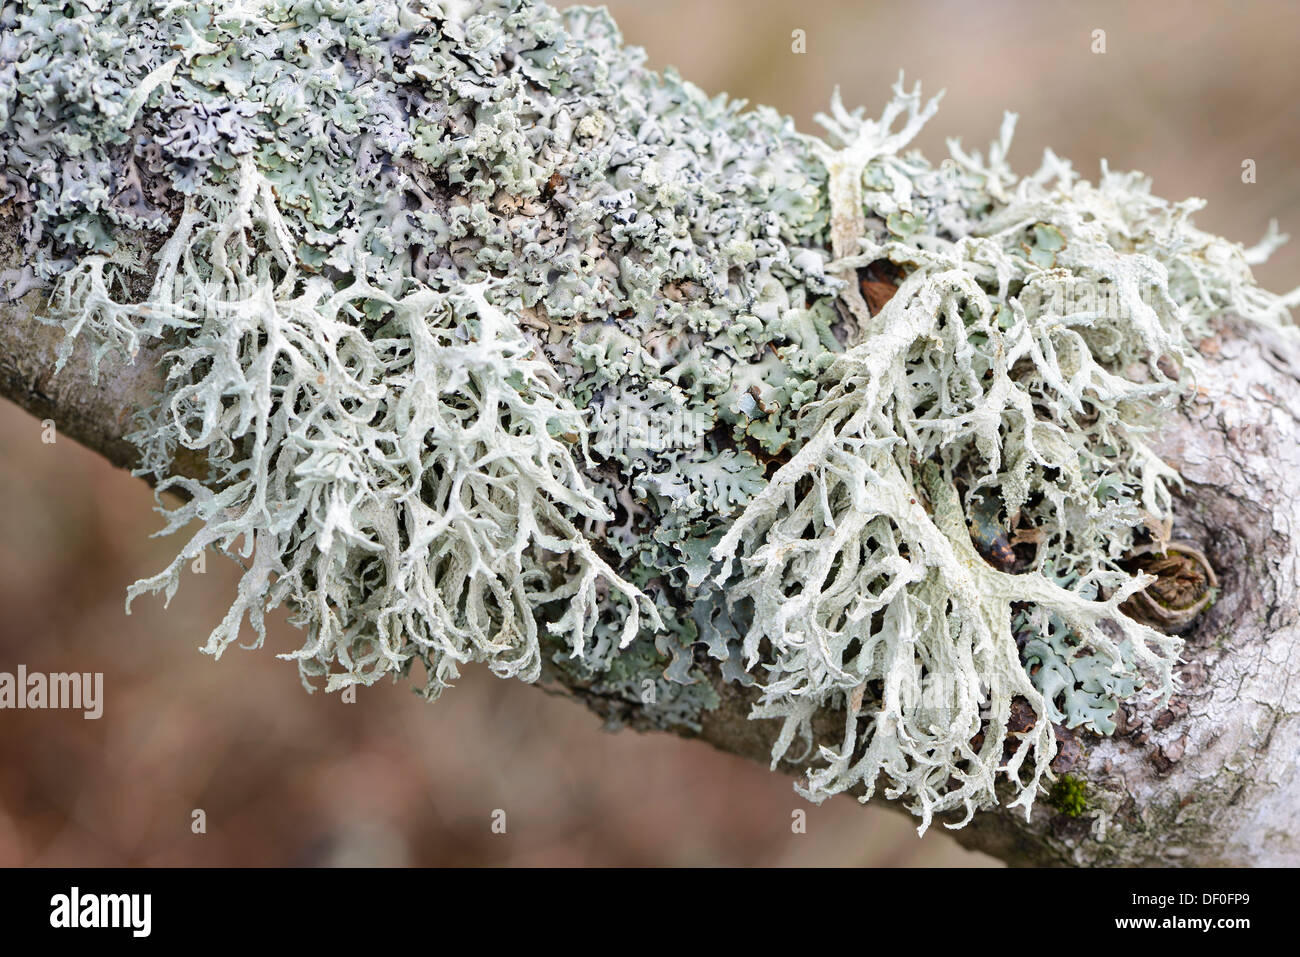 Oakmoss (Evernia prunastri) and lichens (Cetraria chlorophylla), on a birch tree, St. Peter-Ording, North Frisia Stock Photo